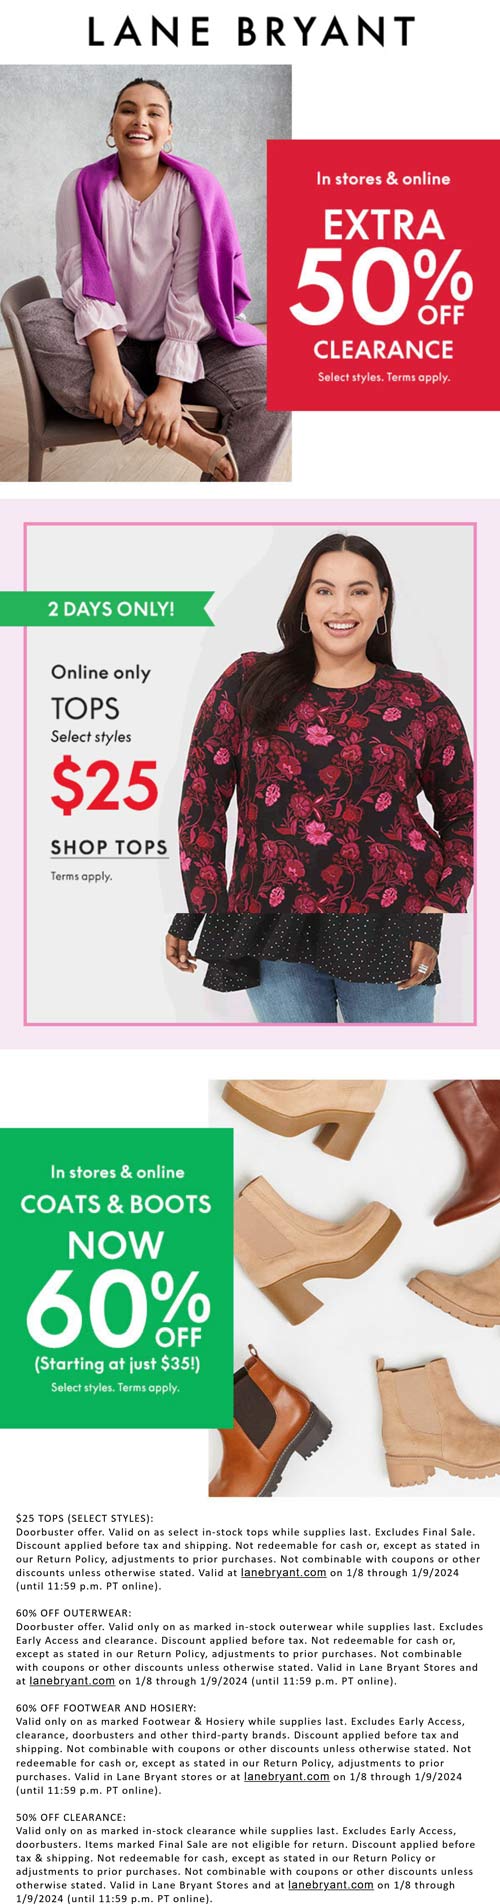 Lane Bryant stores Coupon  60% off outerwear & more at Lane Bryant, ditto online #lanebryant 